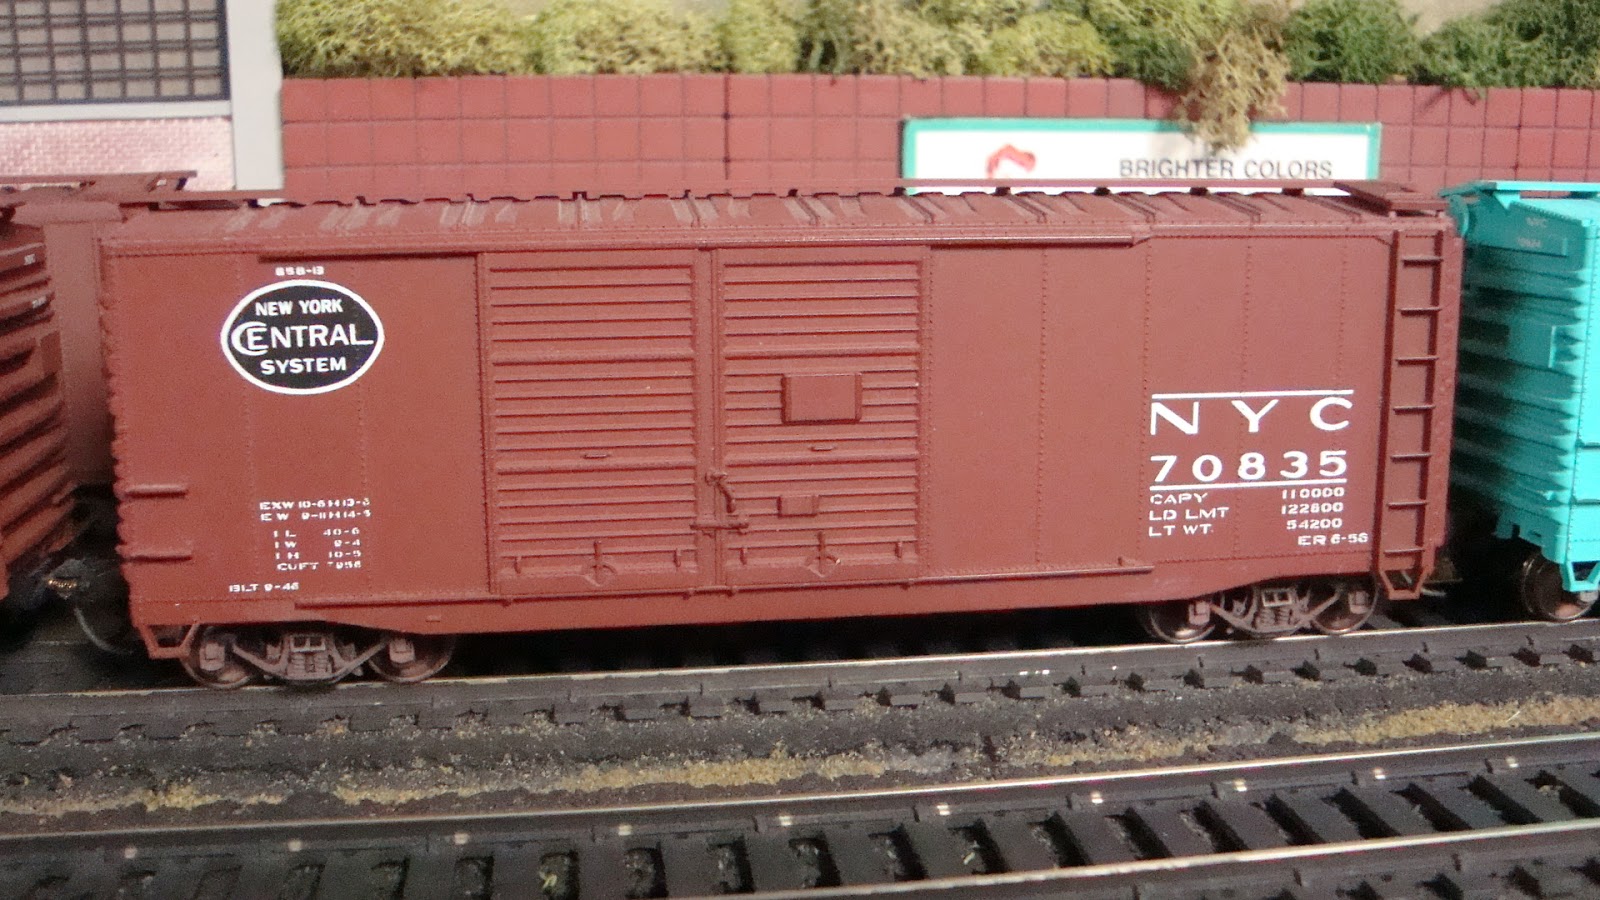 MT 34200 New York Central System 50' Box Car Released April 1997 